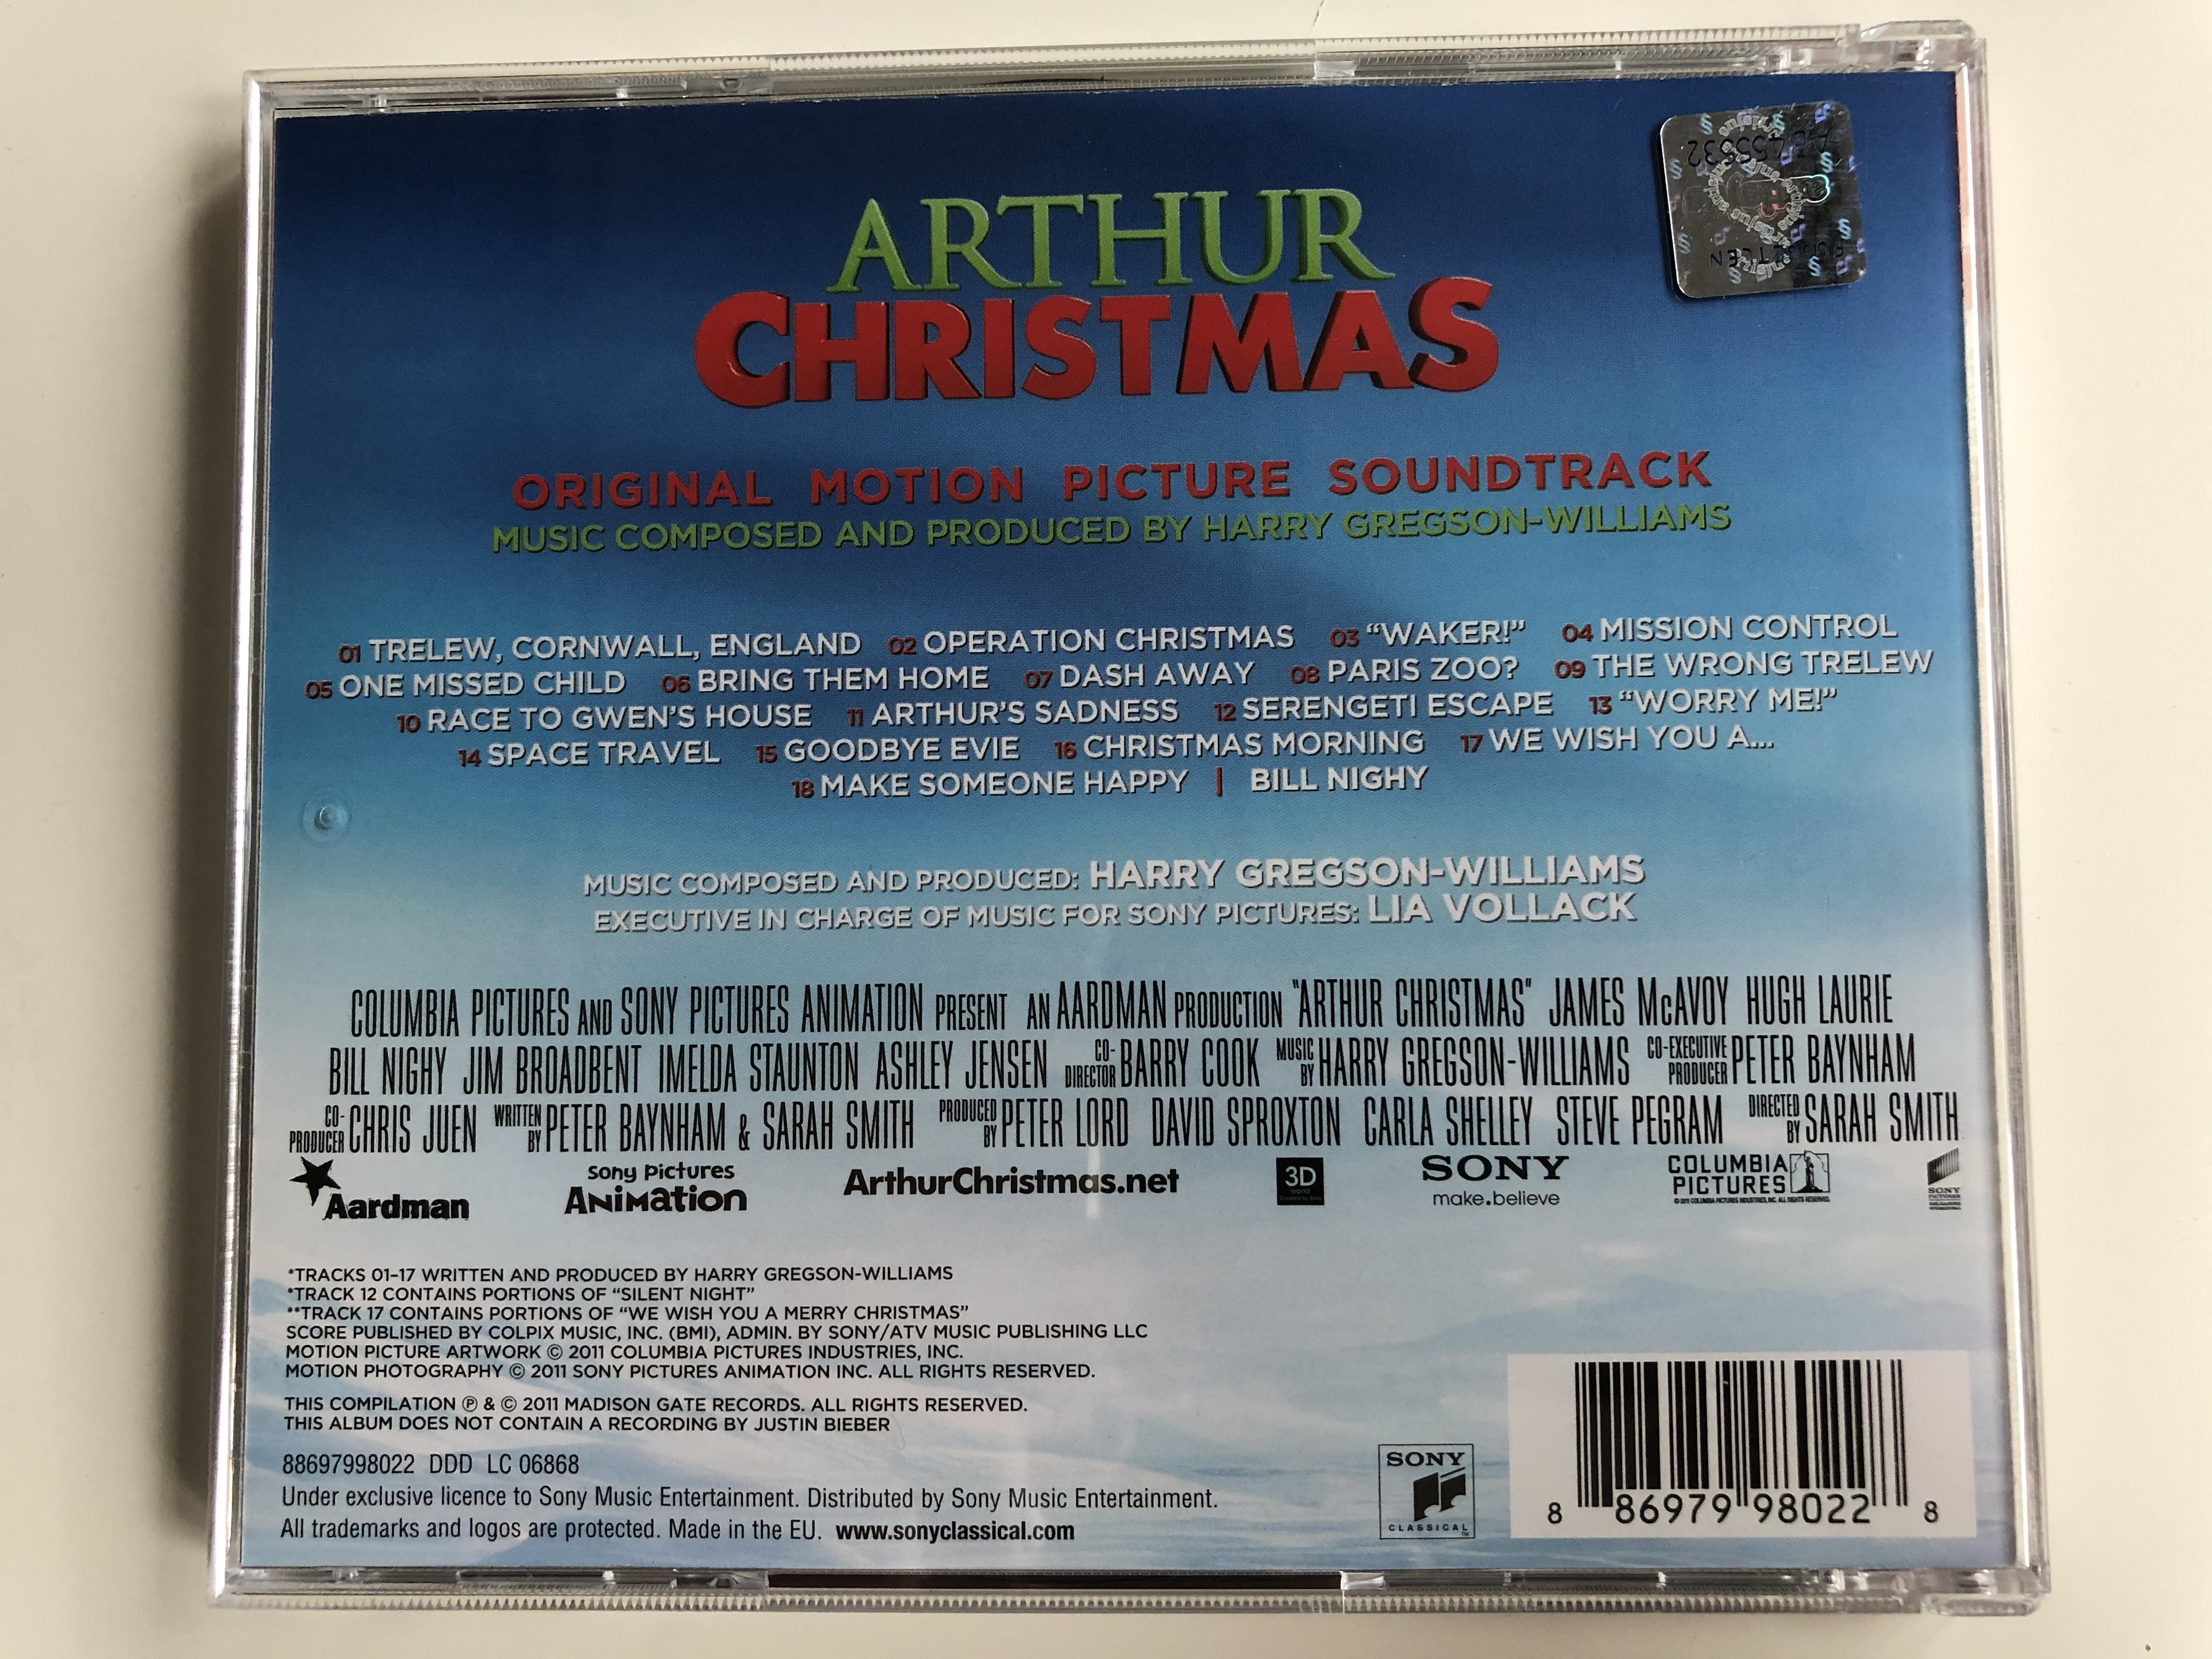 arthur-christmas-original-motion-picture-soundtrack-music-composed-and-produced-by-harry-gregson-williams-sony-classical-audio-cd-2011-88697998022-4-.jpg